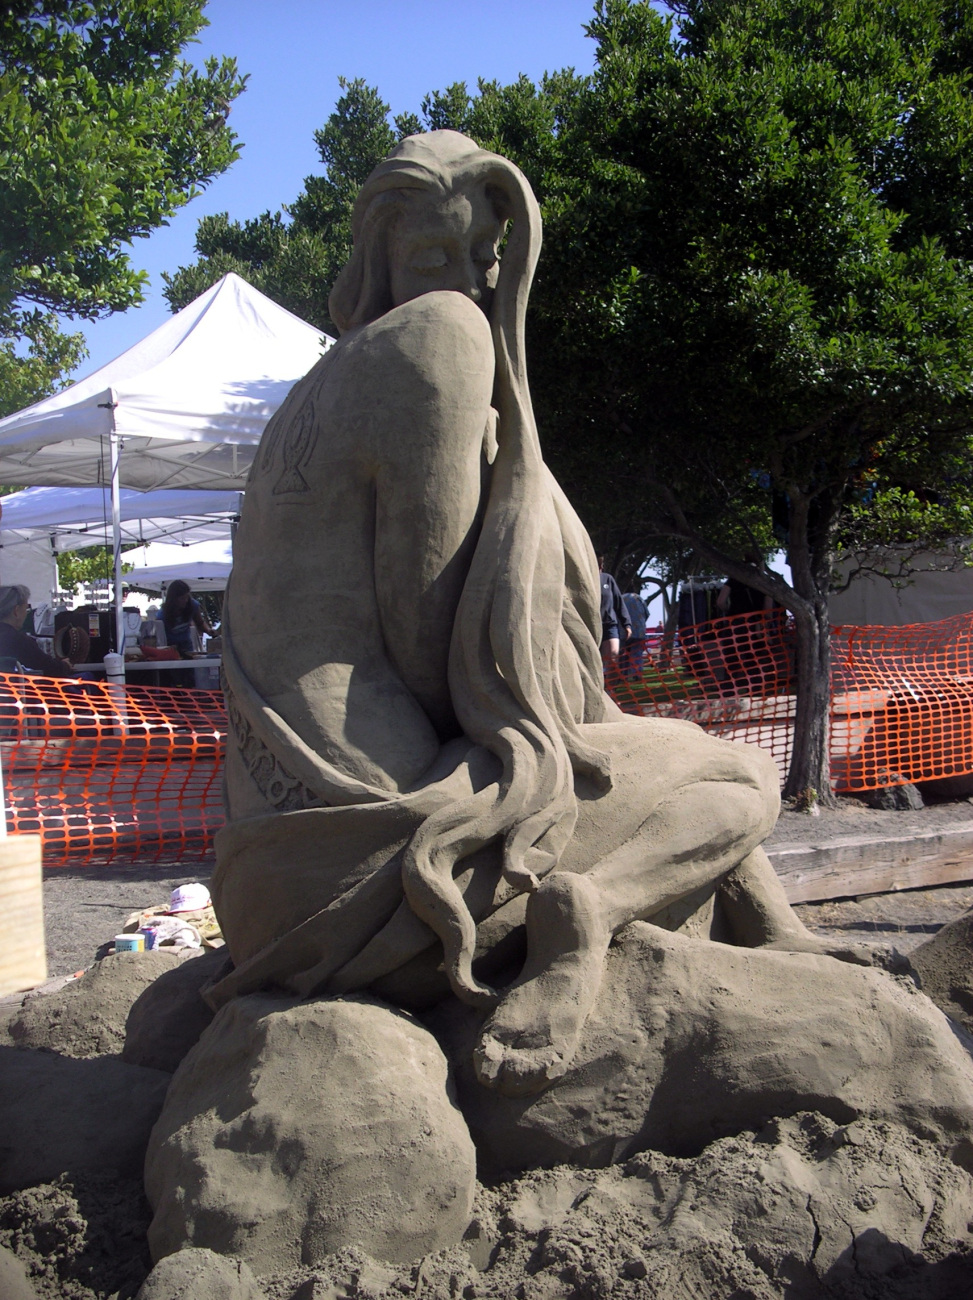 Sand sculpture at annual Arts in Action festival at Port Angeles